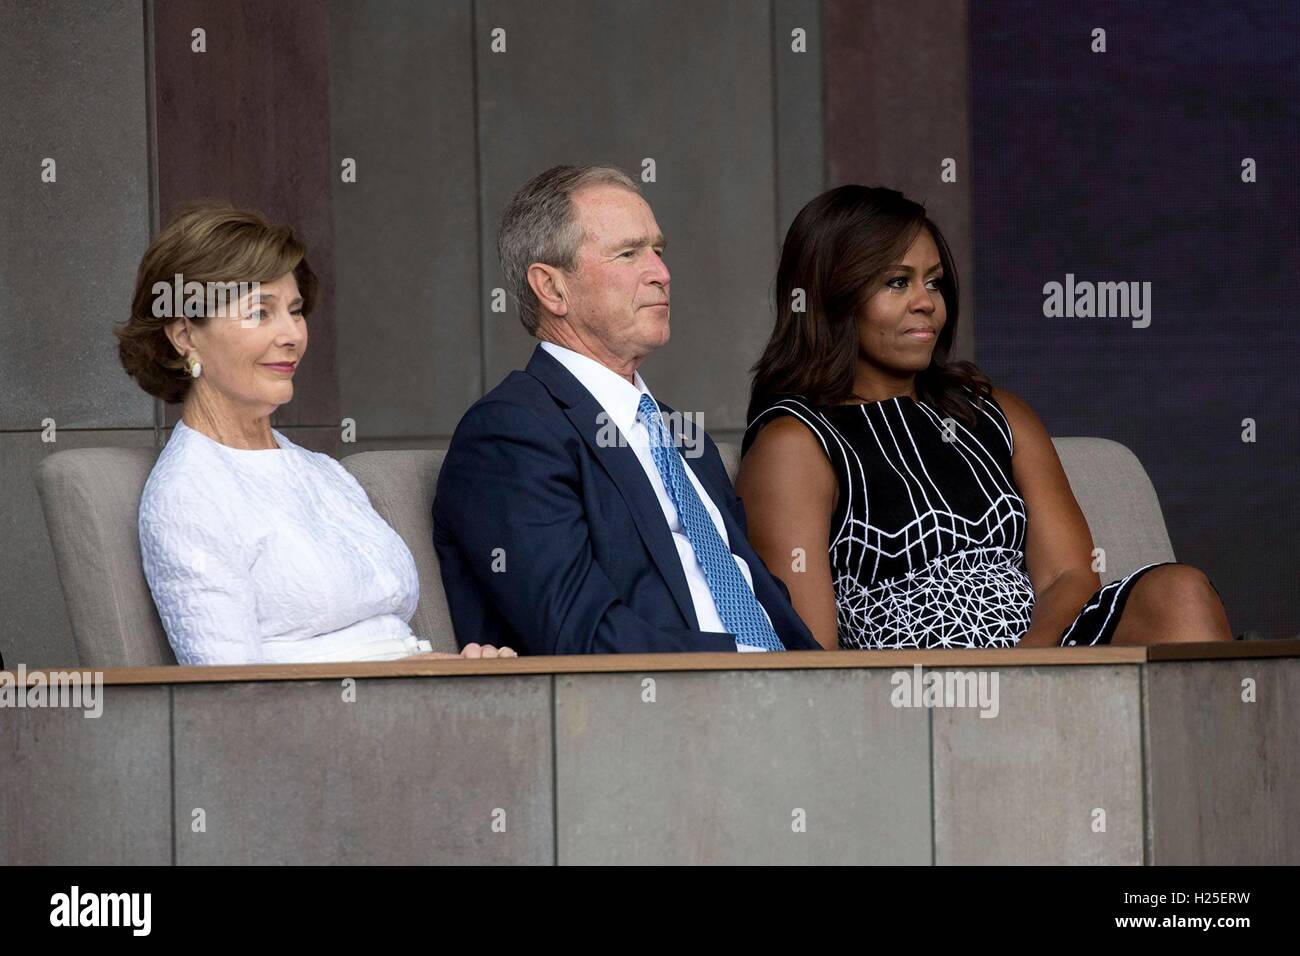 Laura Bush, President George W. Bush and First Lady Michelle Obama listen as President Barack Obama gives remarks during the opening ceremony of the Smithsonian National Museum of African American History and Culture September 24, 2016 in Washington, D.C. The Bonner Family are fourth generation descendants of Ellijah B. Odom, a young slave who escaped to freedom. Stock Photo